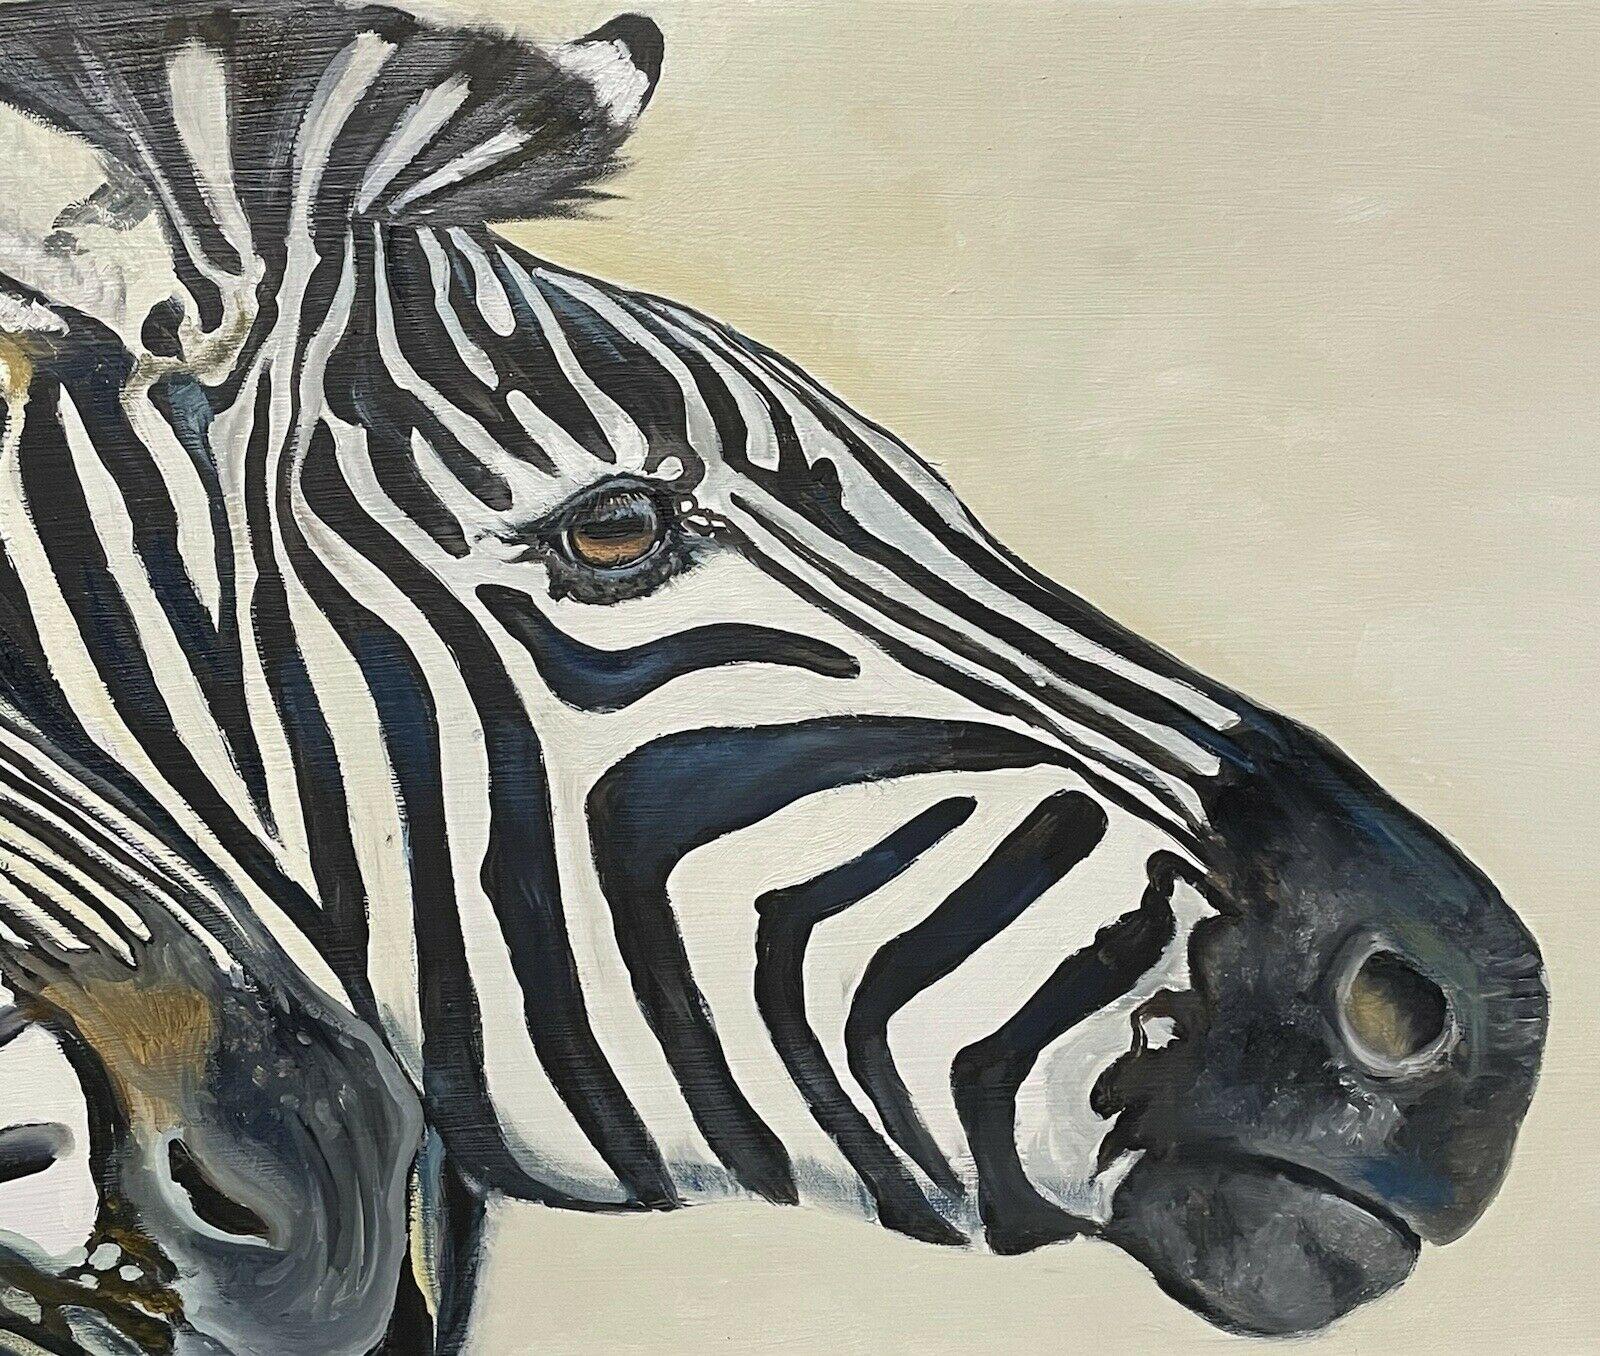 HUGE OIL PAINTING OF TWO ZEBRAS - BY CLIVE FREDRIKSSON - FRAMED & STUNNING - Realist Painting by Clive Fredriksson